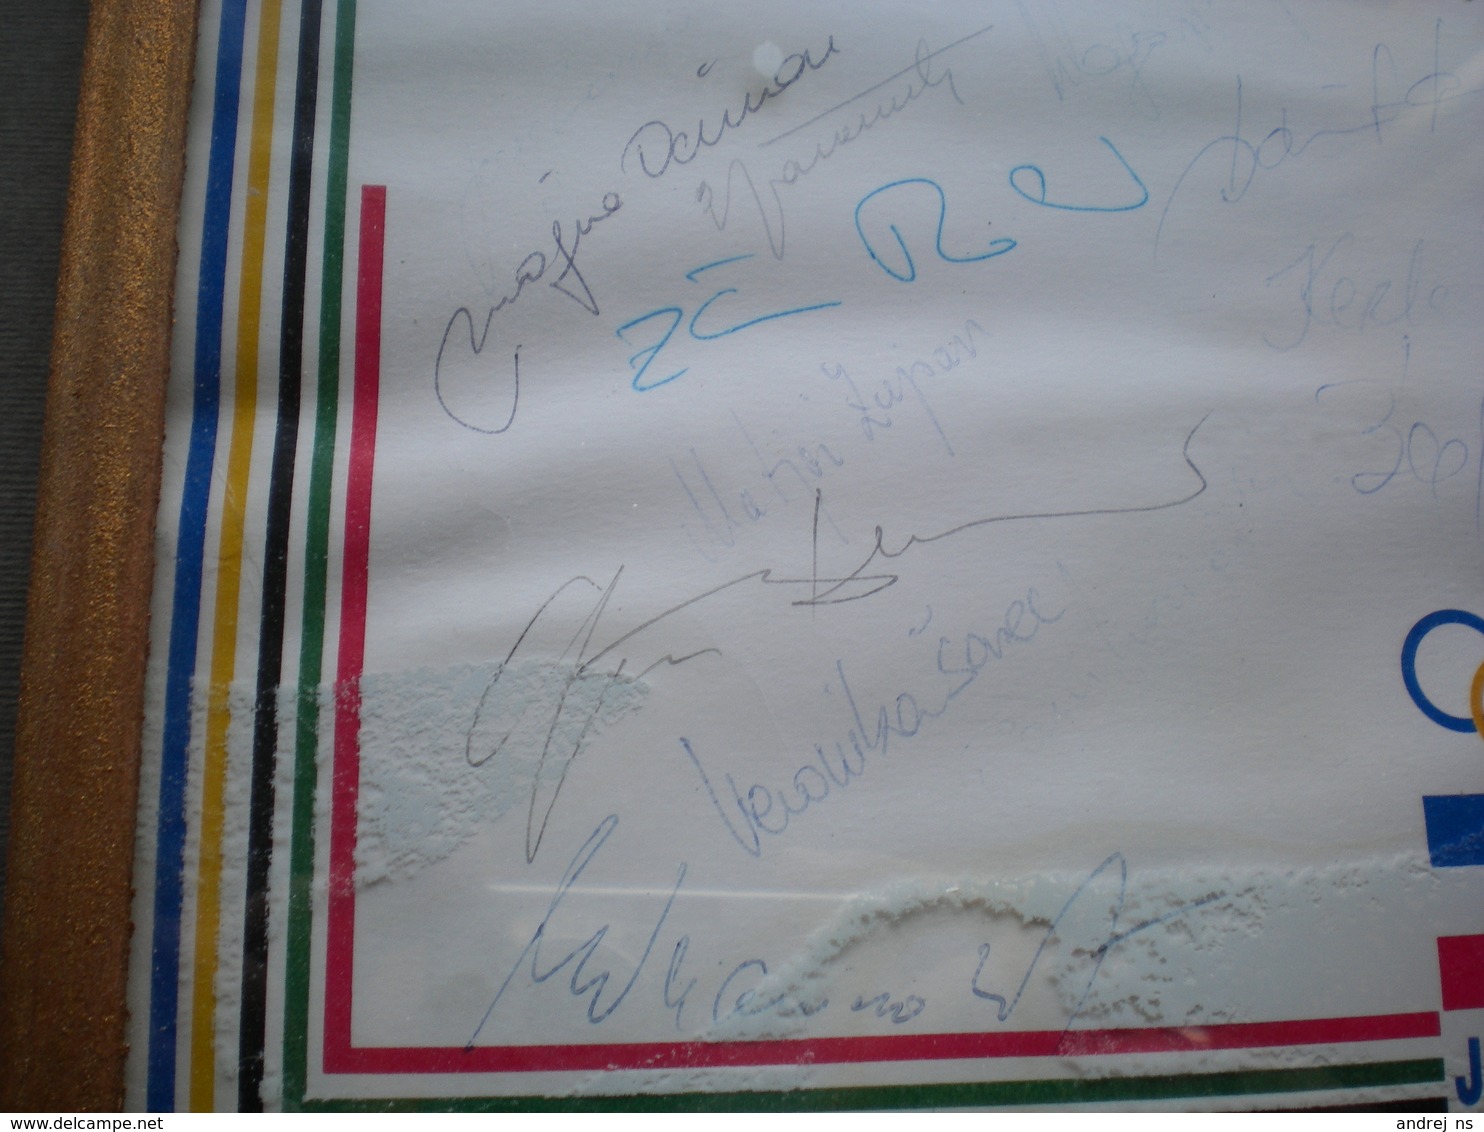 Signatures Authographs Calgary 1988 Yugoslav olympic team sends you many greetings from the Plympic Winter Games